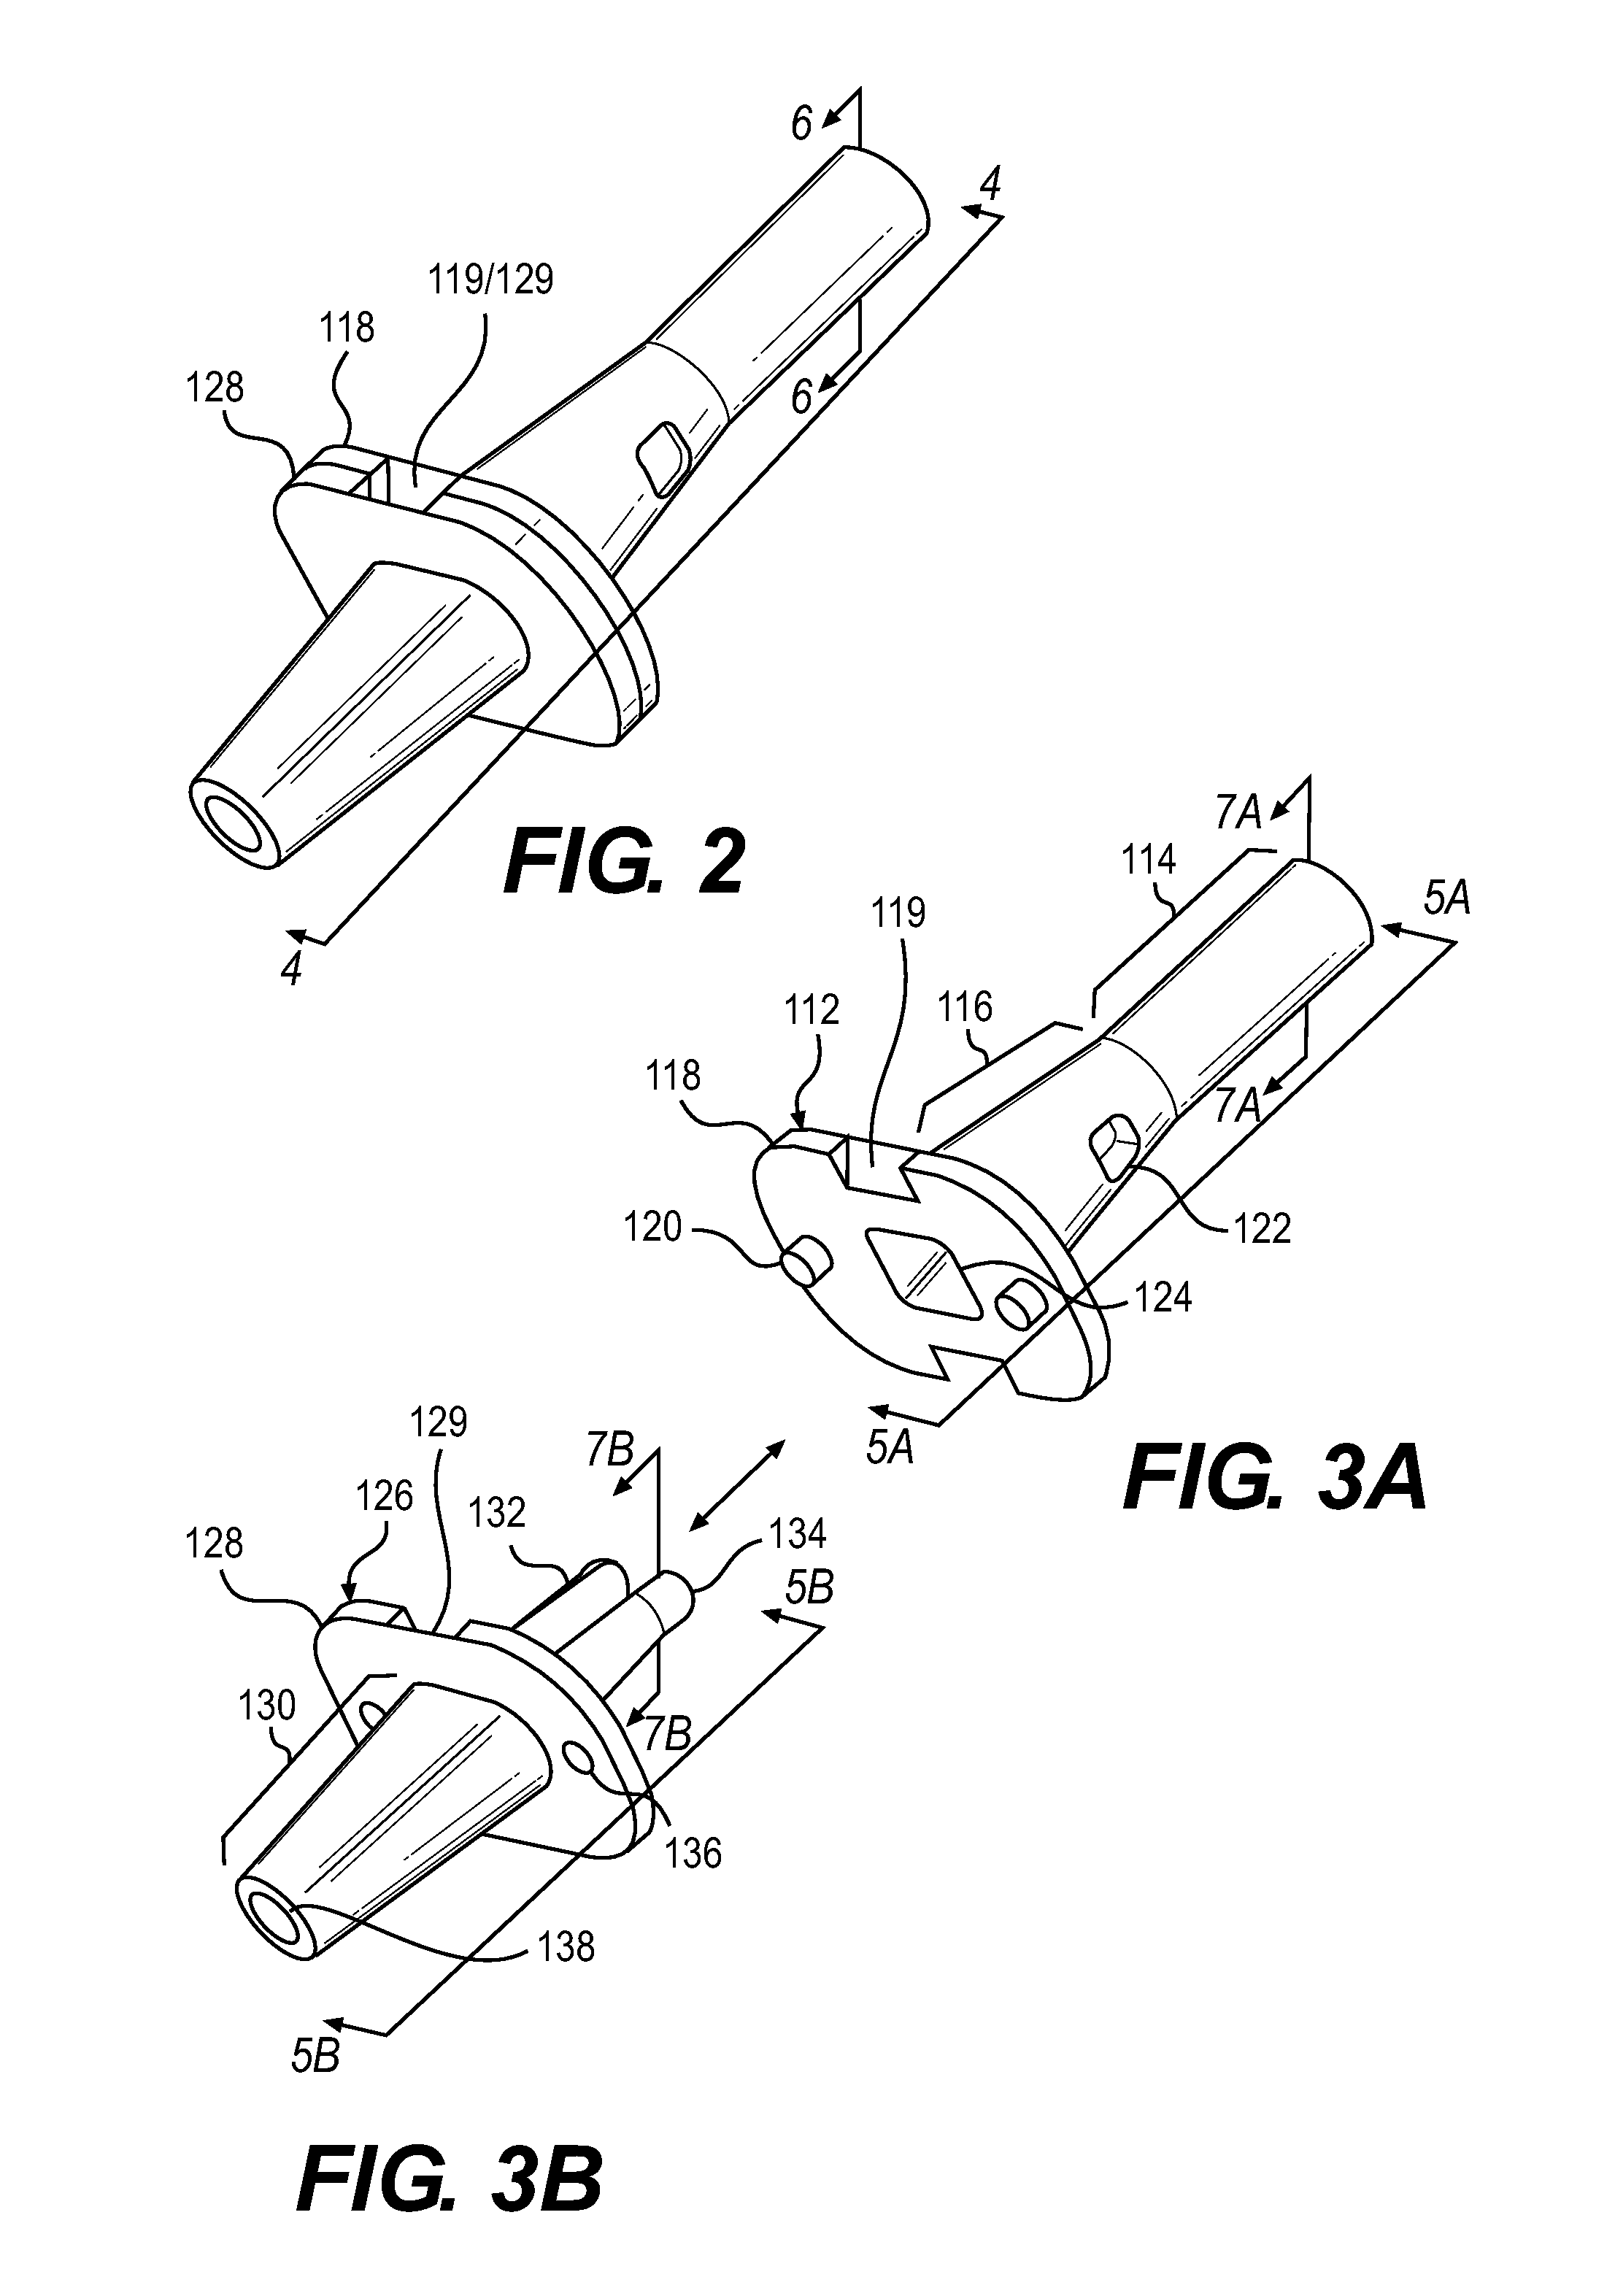 Interphalangeal joint implant methods and apparatus